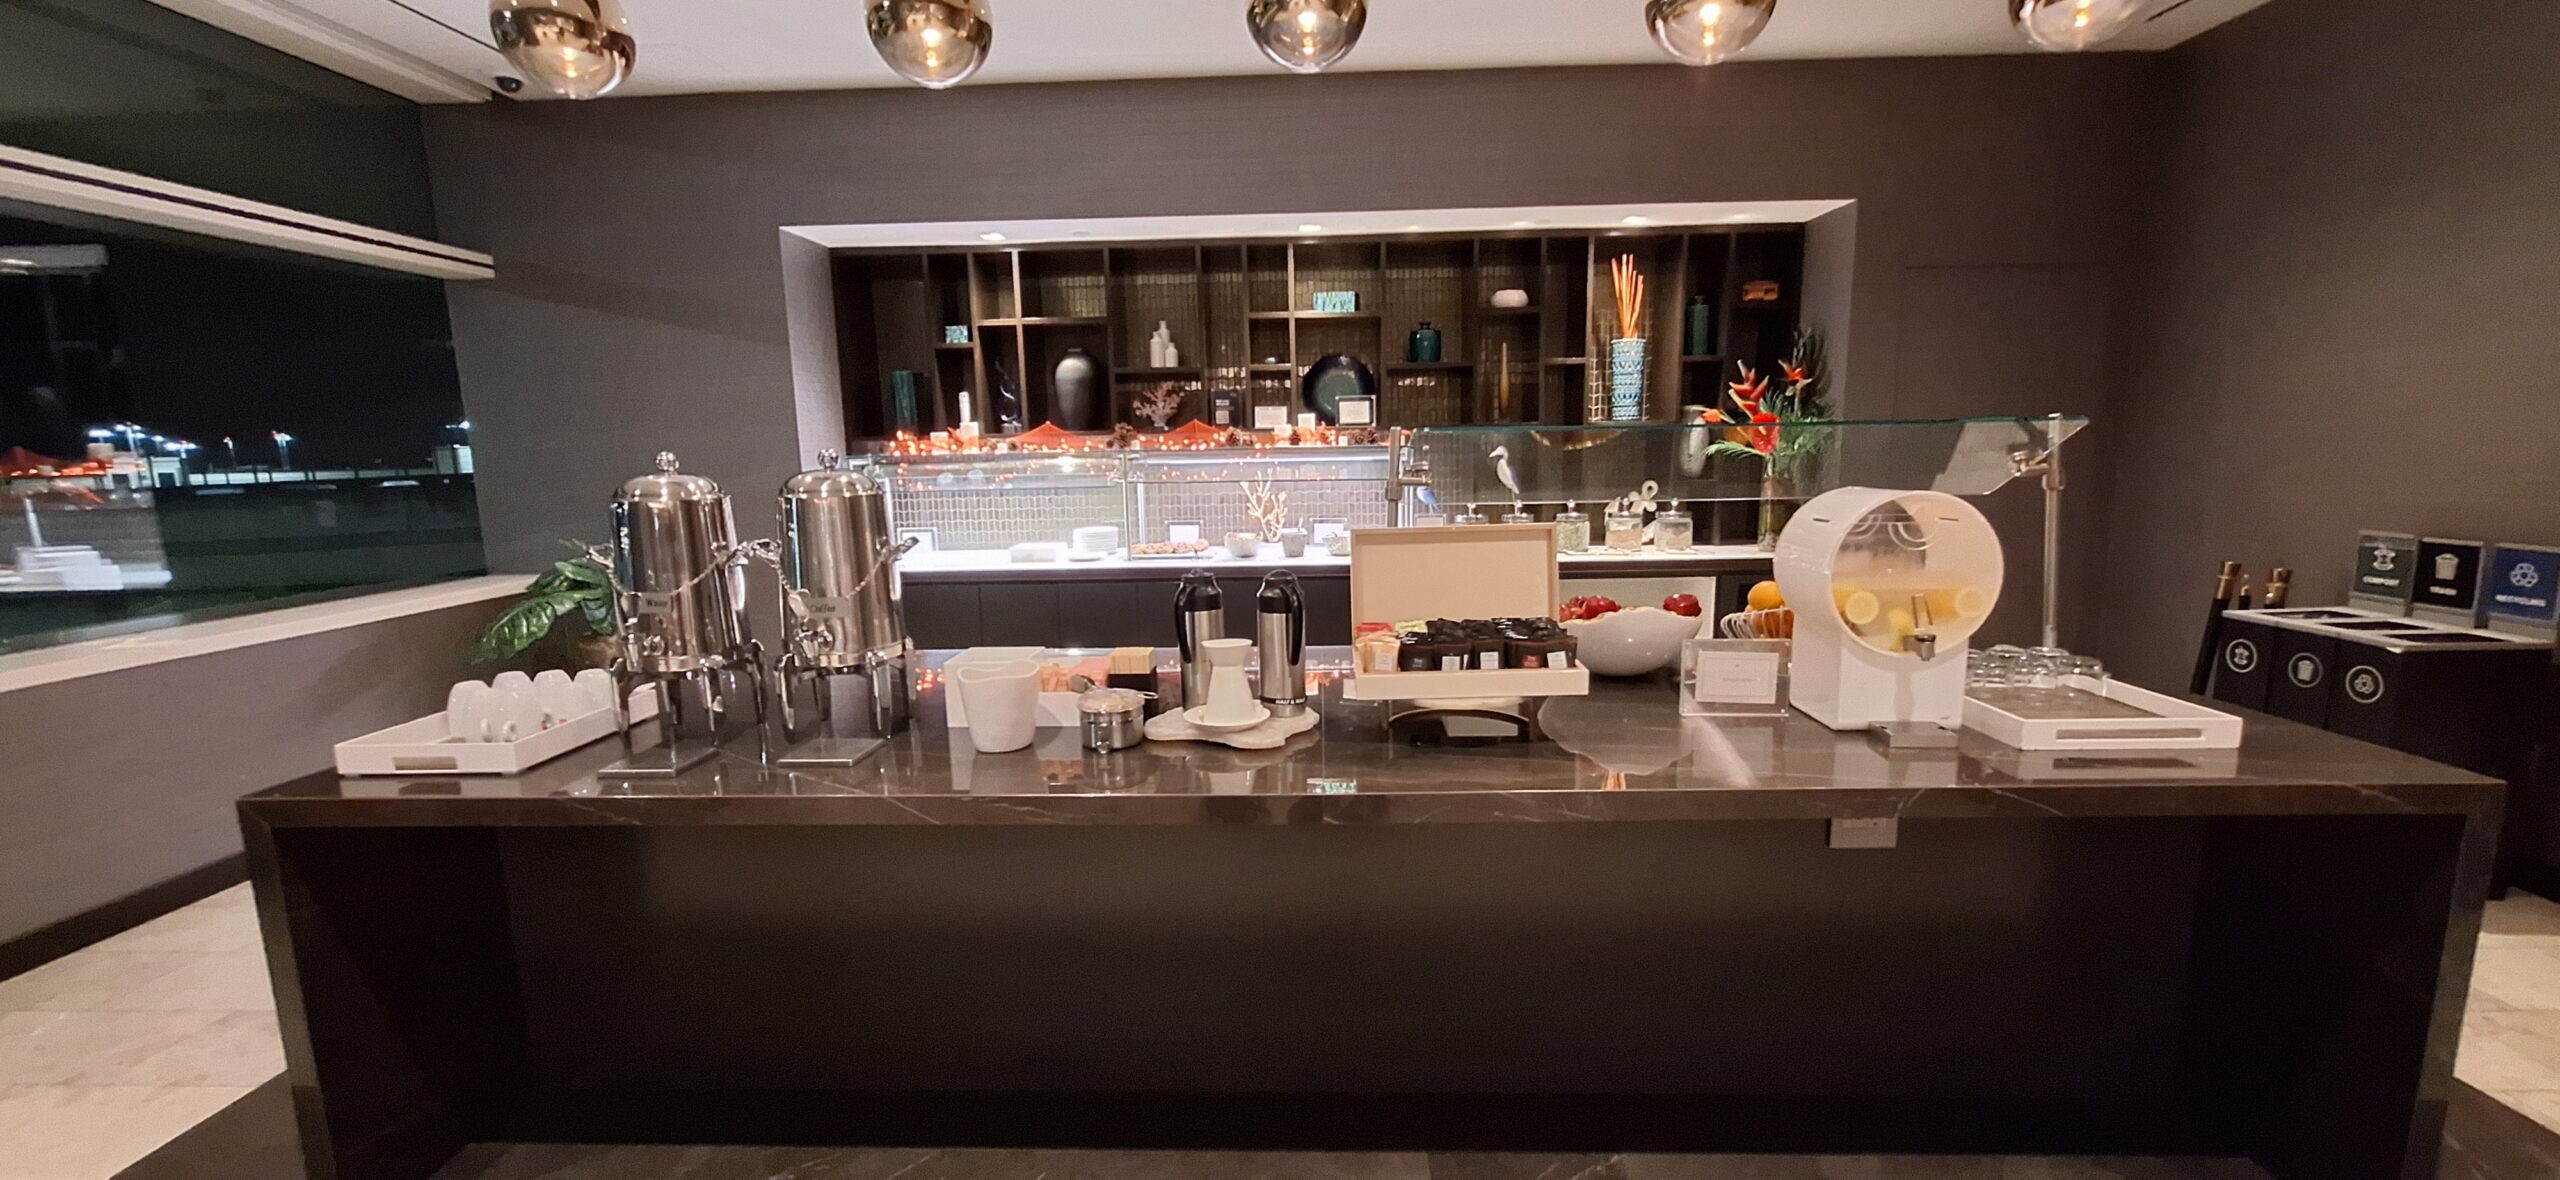 a counter with a variety of objects on it